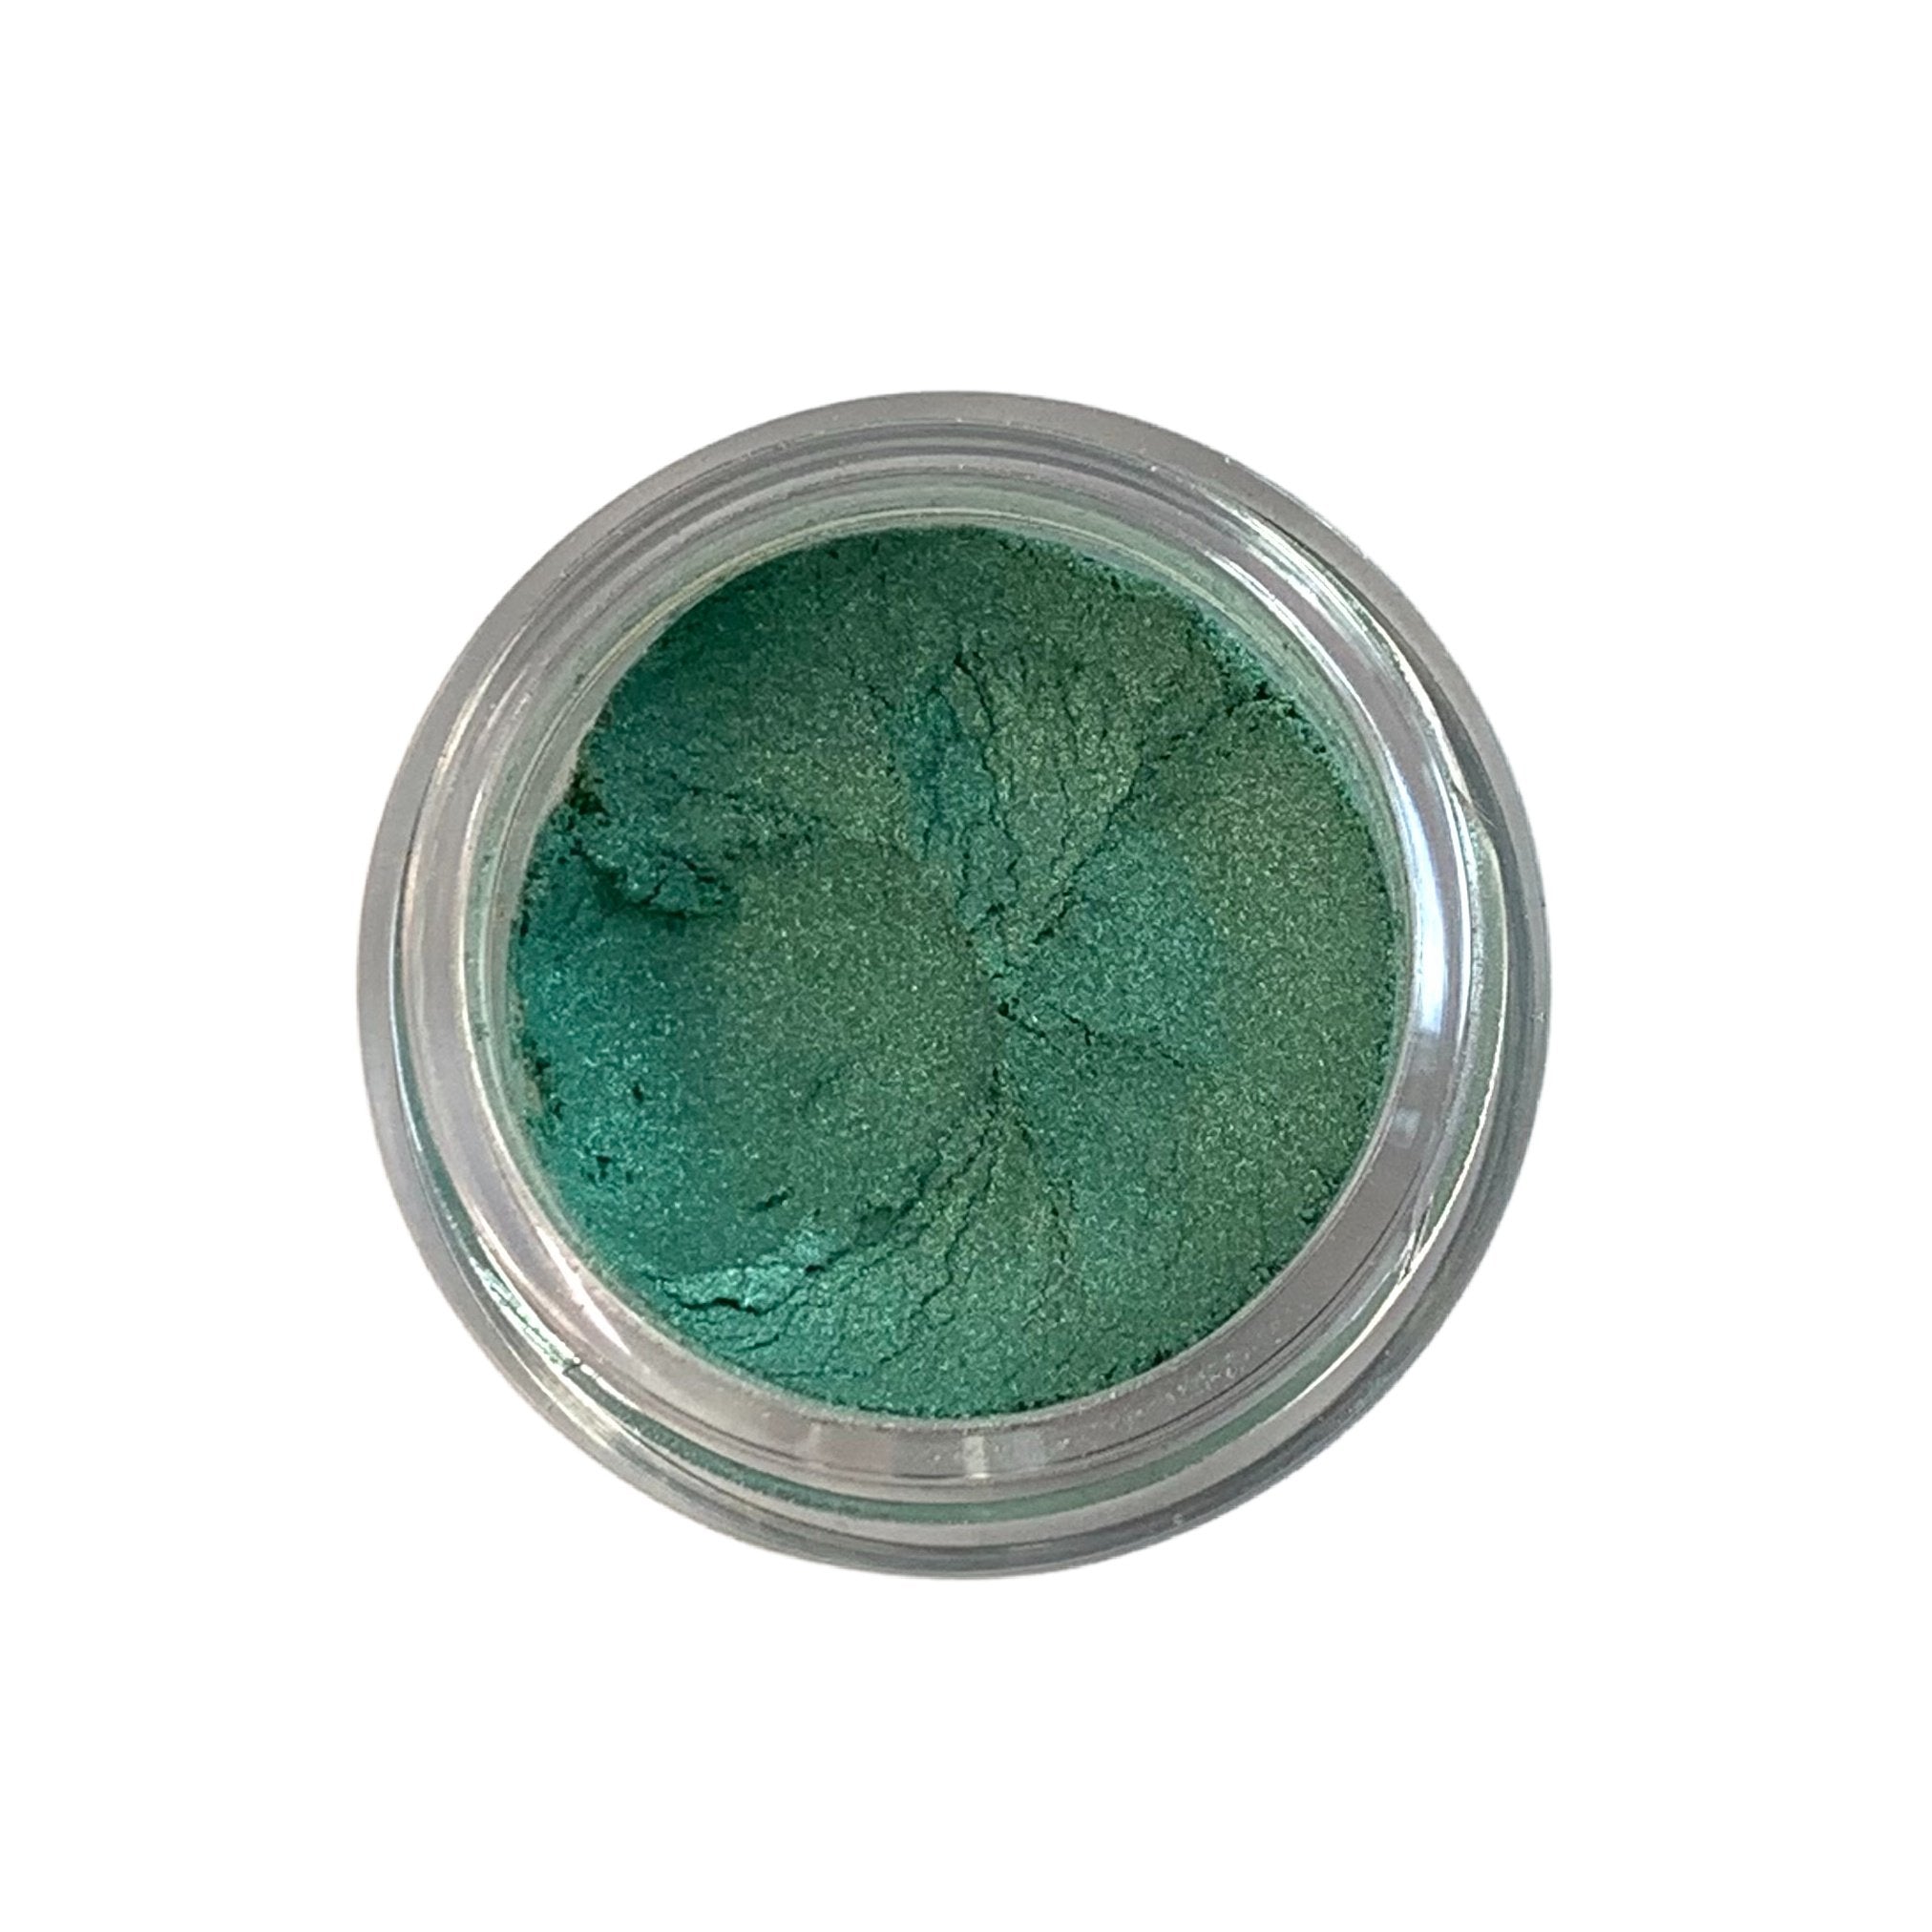 enchanted - an earthy green loose mineral eyeshadow. comes in a 10gram sifter jar, vegan and cruelty free.